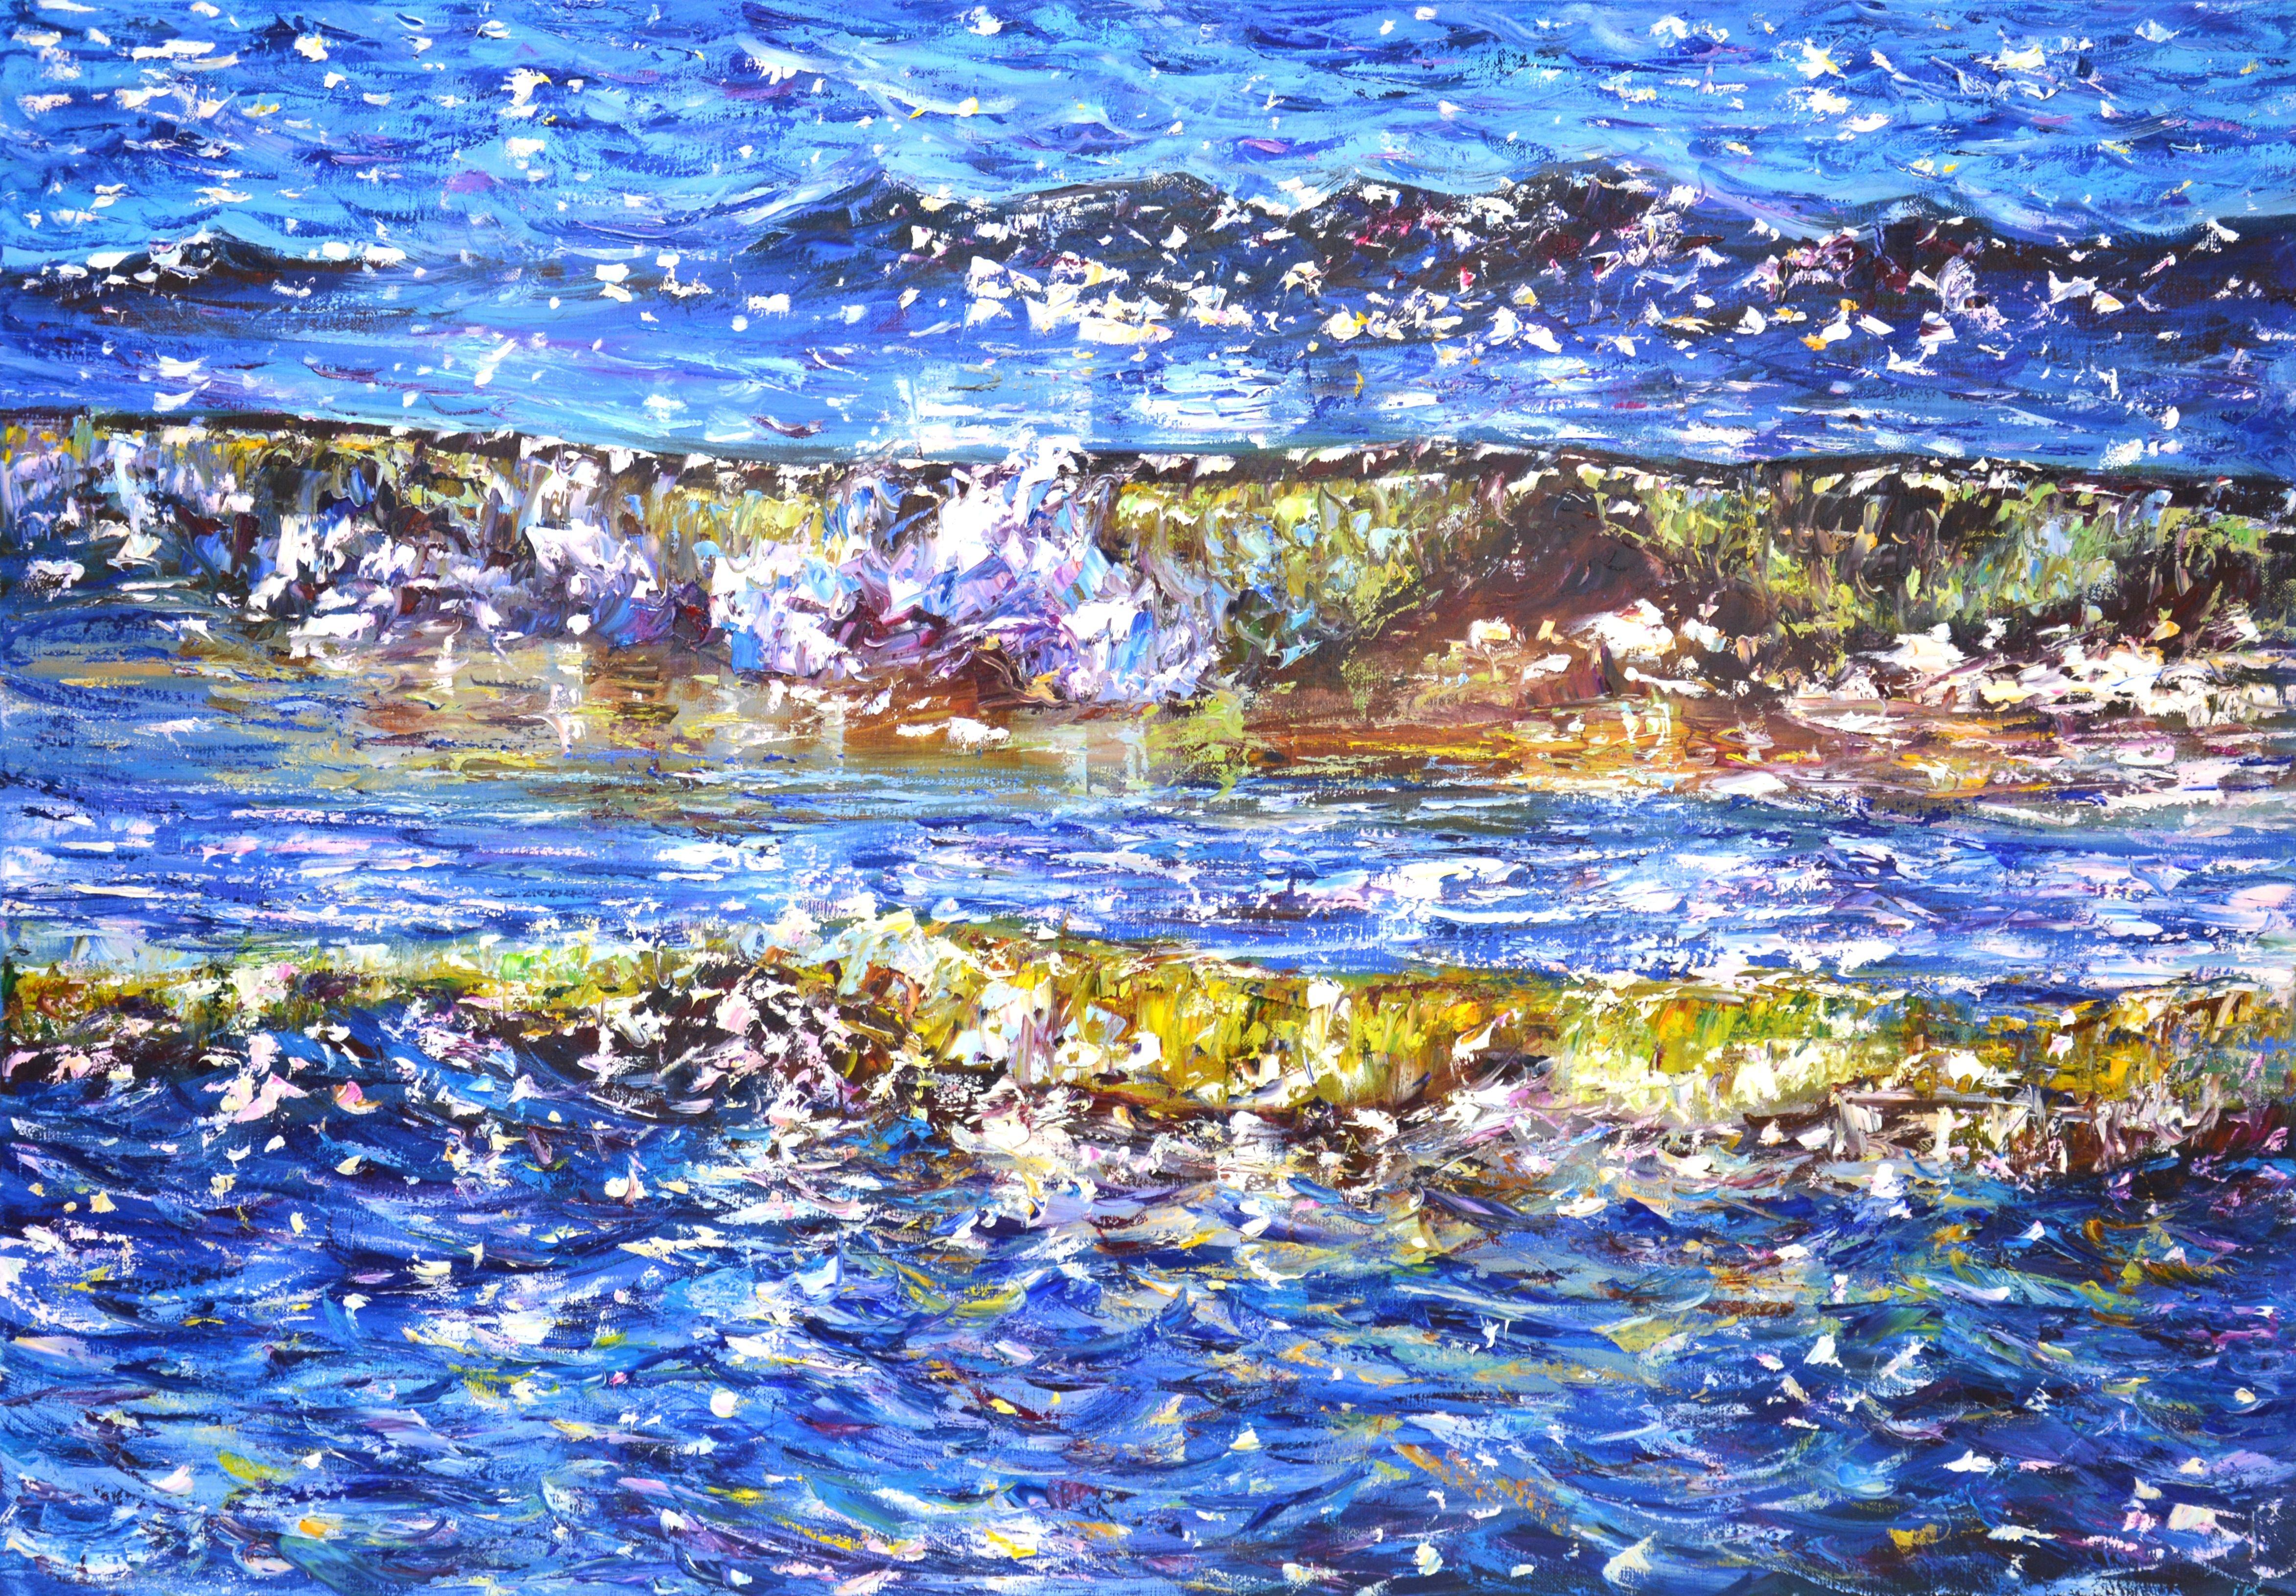 Glare on the water 8. Ocean shine, small waves, sun glare on the water create an atmosphere of relaxation, romance. Made in the style of realism, impressionism, using a brush and palette knife. Part of a permanent series of seascapes. The picture is